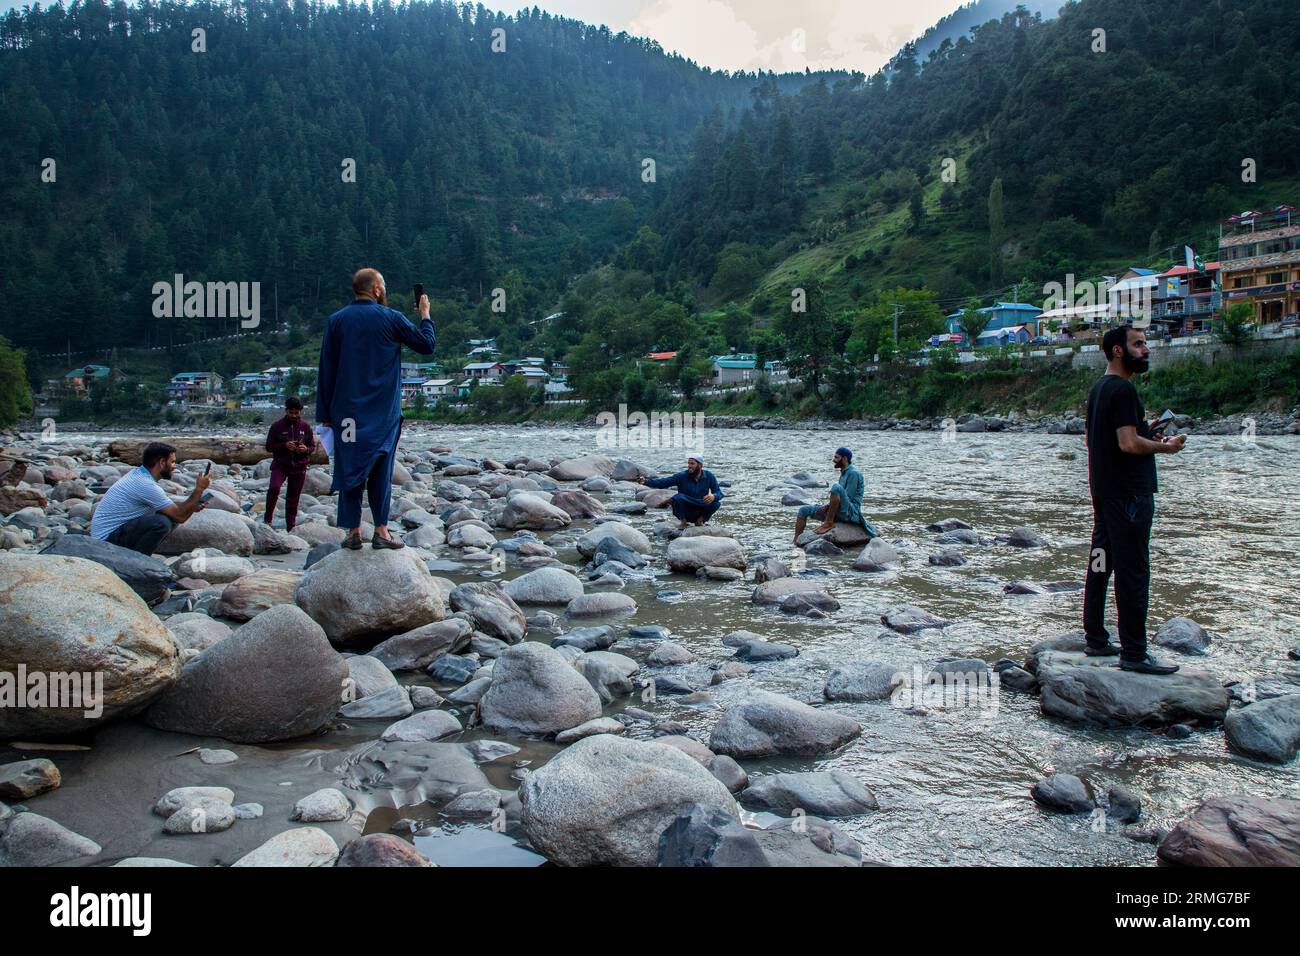 Keran Kupwara, India. 24th Aug, 2023. People are seen filming towards Pakistan Administered Kashmir on the banks of Neelam river or Kishan Ganga that has divided Kashmir into two parts controlled by nuclear rivals India and Pakistan. The river acts as a disputed line of control and flows through a village called Keran from both sides which is located on the northern side of Indian Kashmir's Border district Kupwara some 150kms from Srinagar and 93kms from Muzaffarabad, in the Pakistan side of Kashmir. (Photo by Faisal Bashir/SOPA Images/Sipa USA) Credit: Sipa USA/Alamy Live News Stock Photo